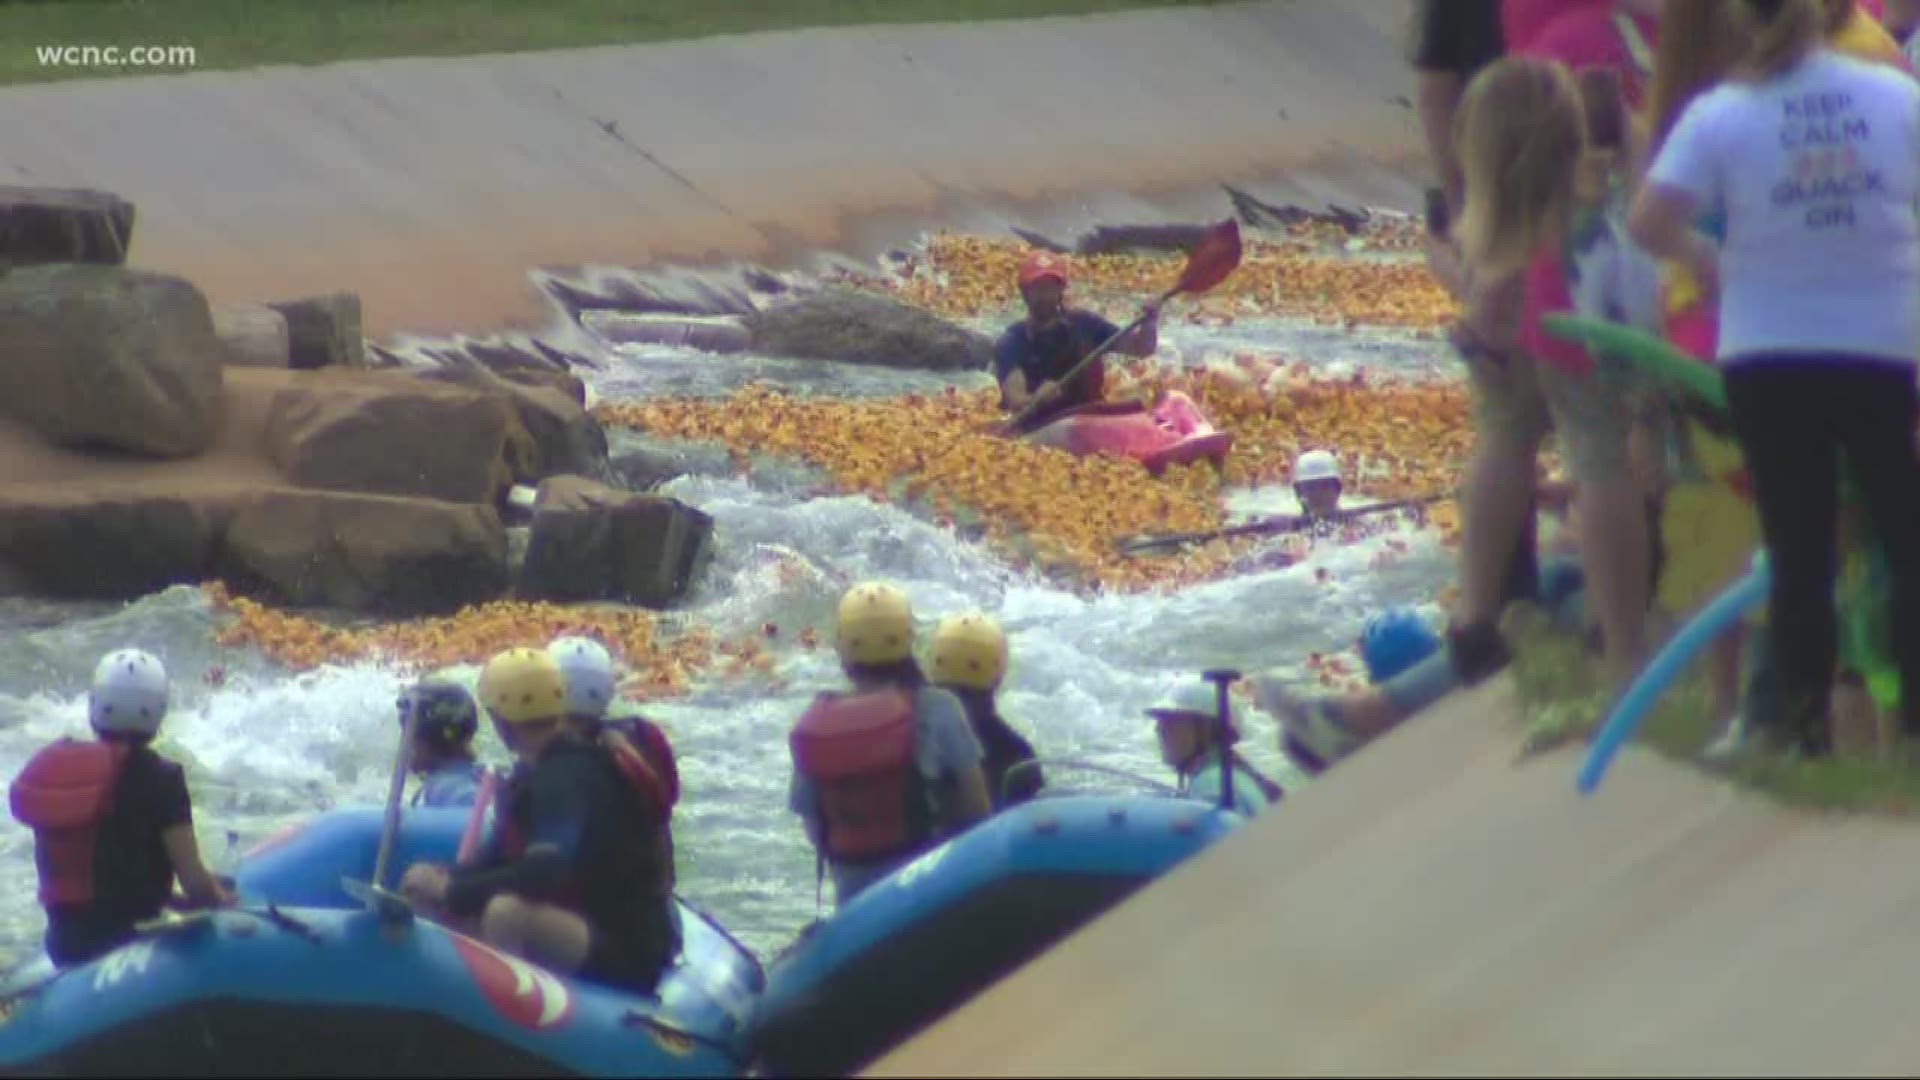 Thousands lined the banks of the National Whitewater Center to watch rubber ducks brave the rapids. The race benefits Kindermourn, an organization that helps those who have lost a child or parent.